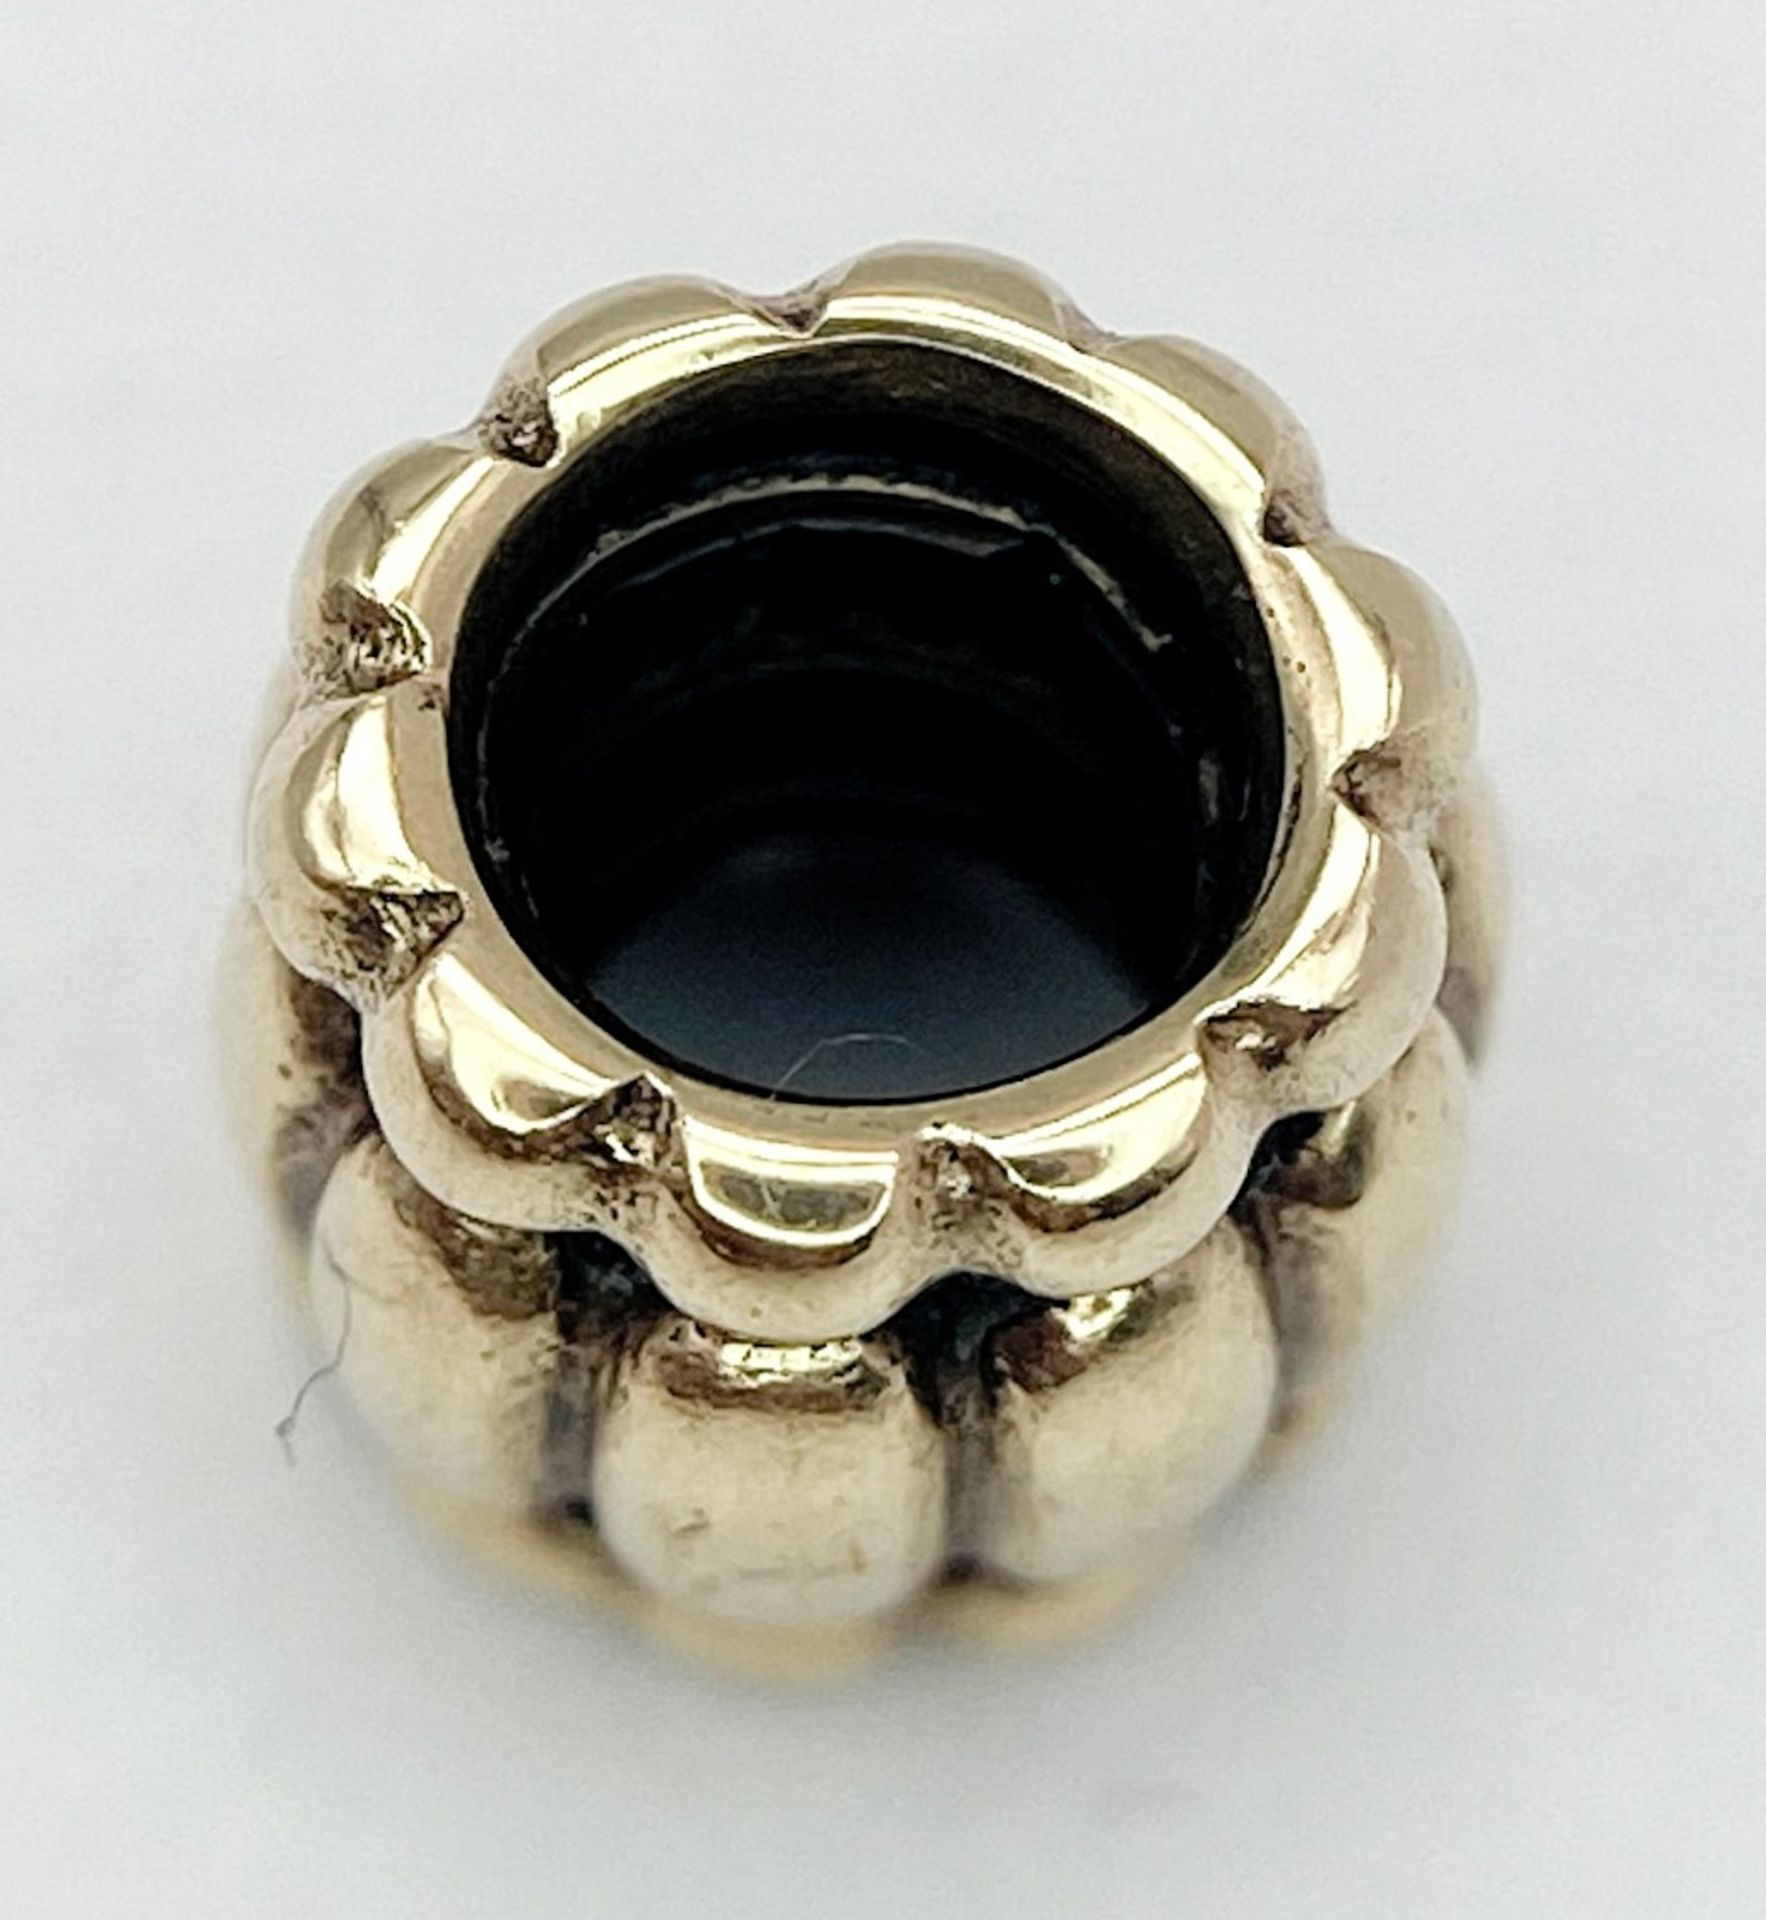 A 14K YELLOW GOLD PANDORA CHARM. 7mm length, 2.2g weight. Ref: SC 8134 - Image 2 of 5